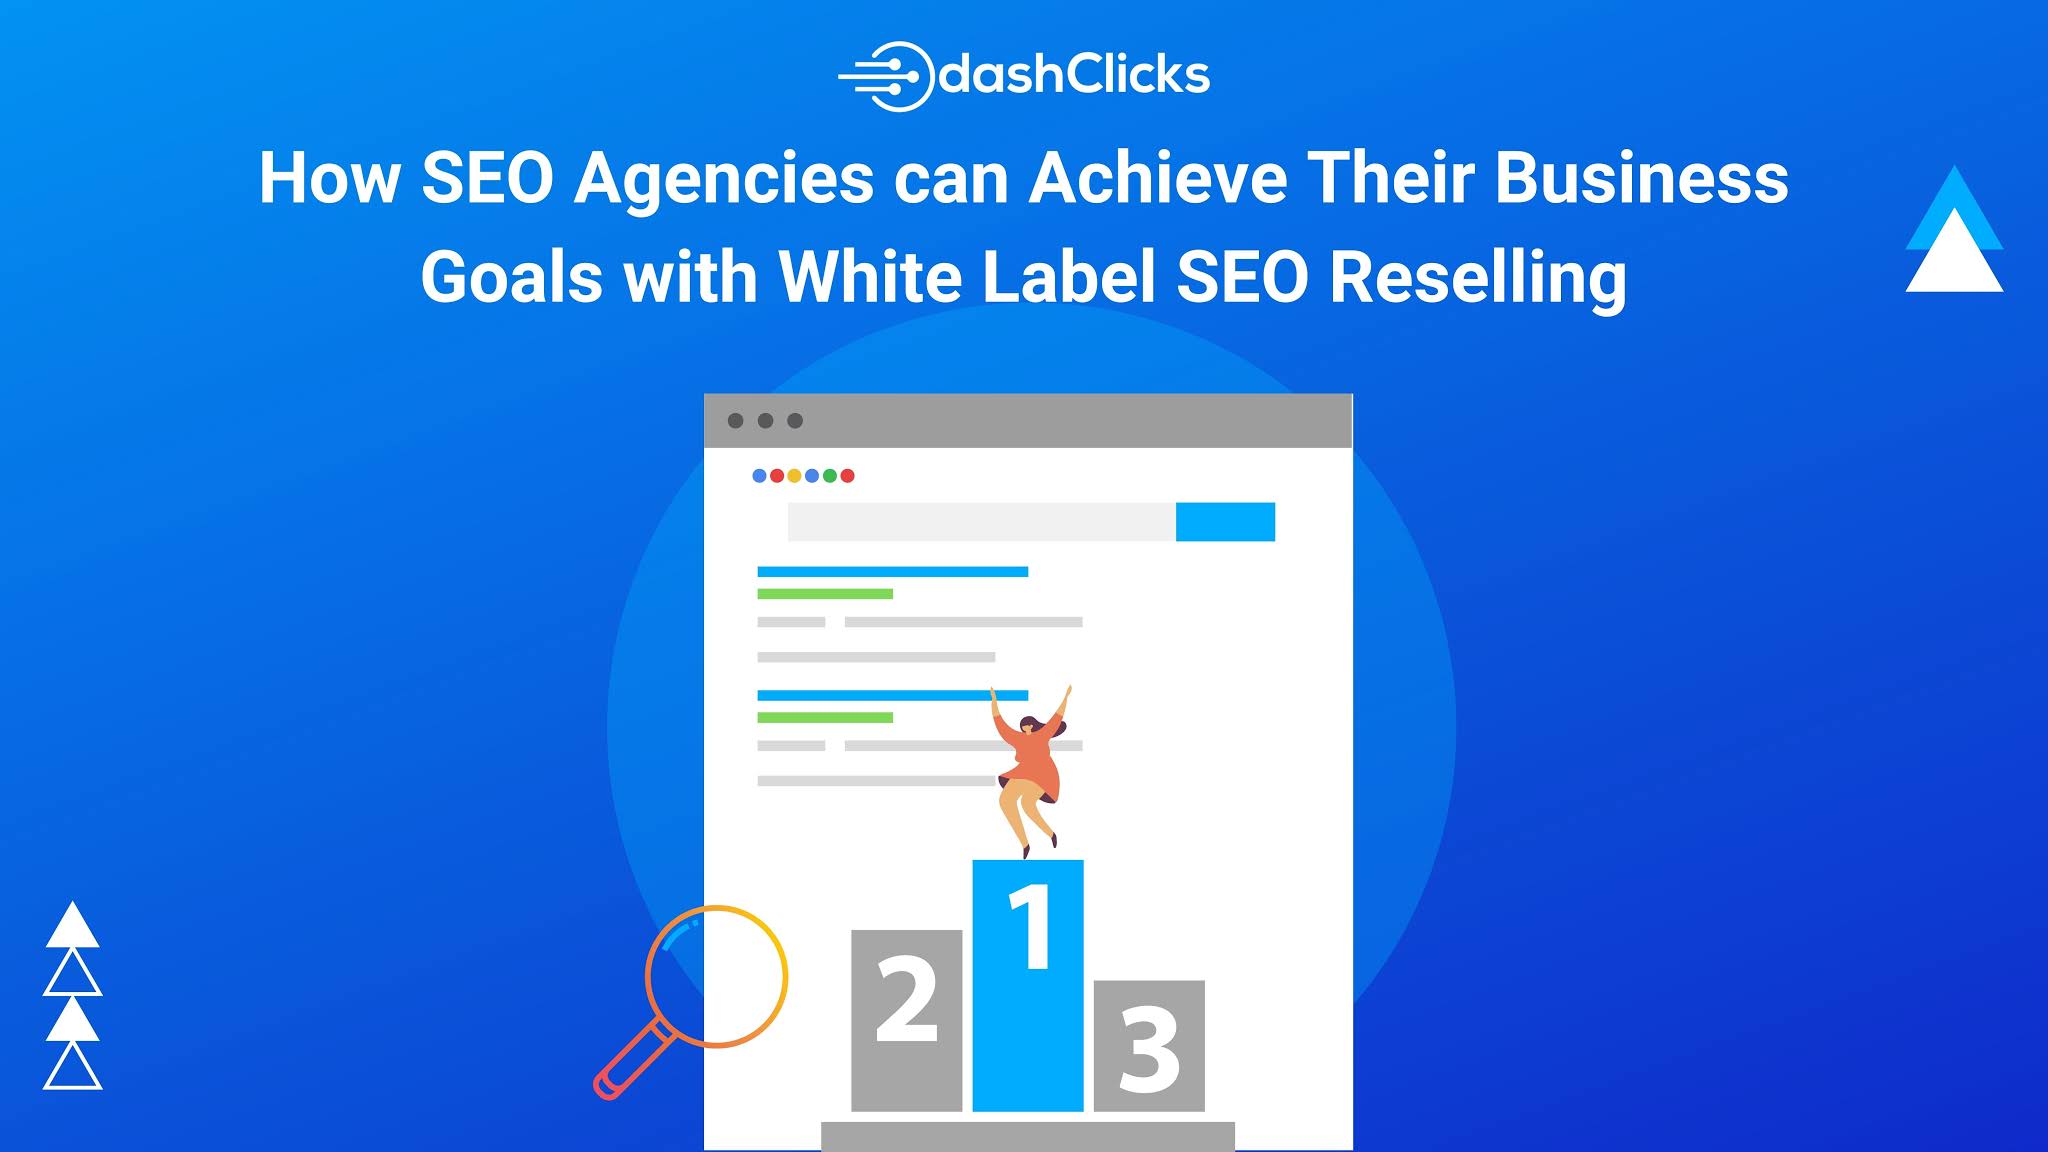 How SEO Agencies can Achieve Their Business Goals with White Label SEO Reselling